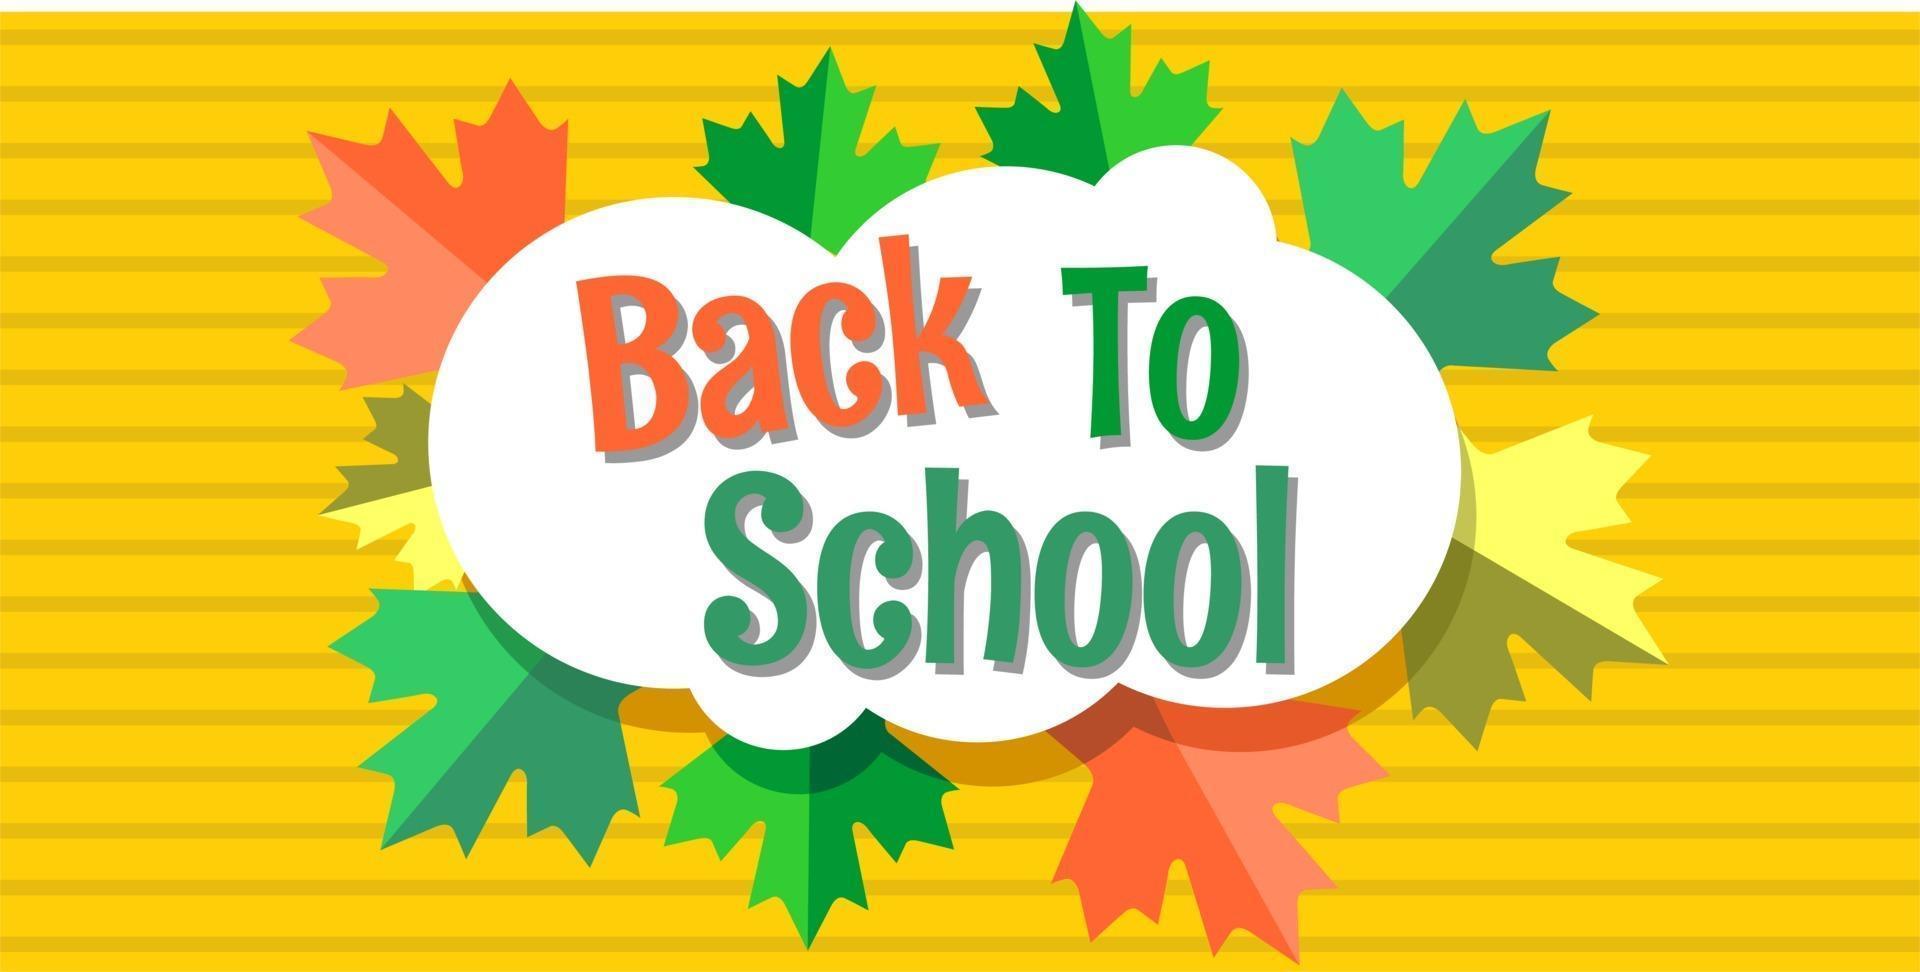 Back to school with school items and elements vector